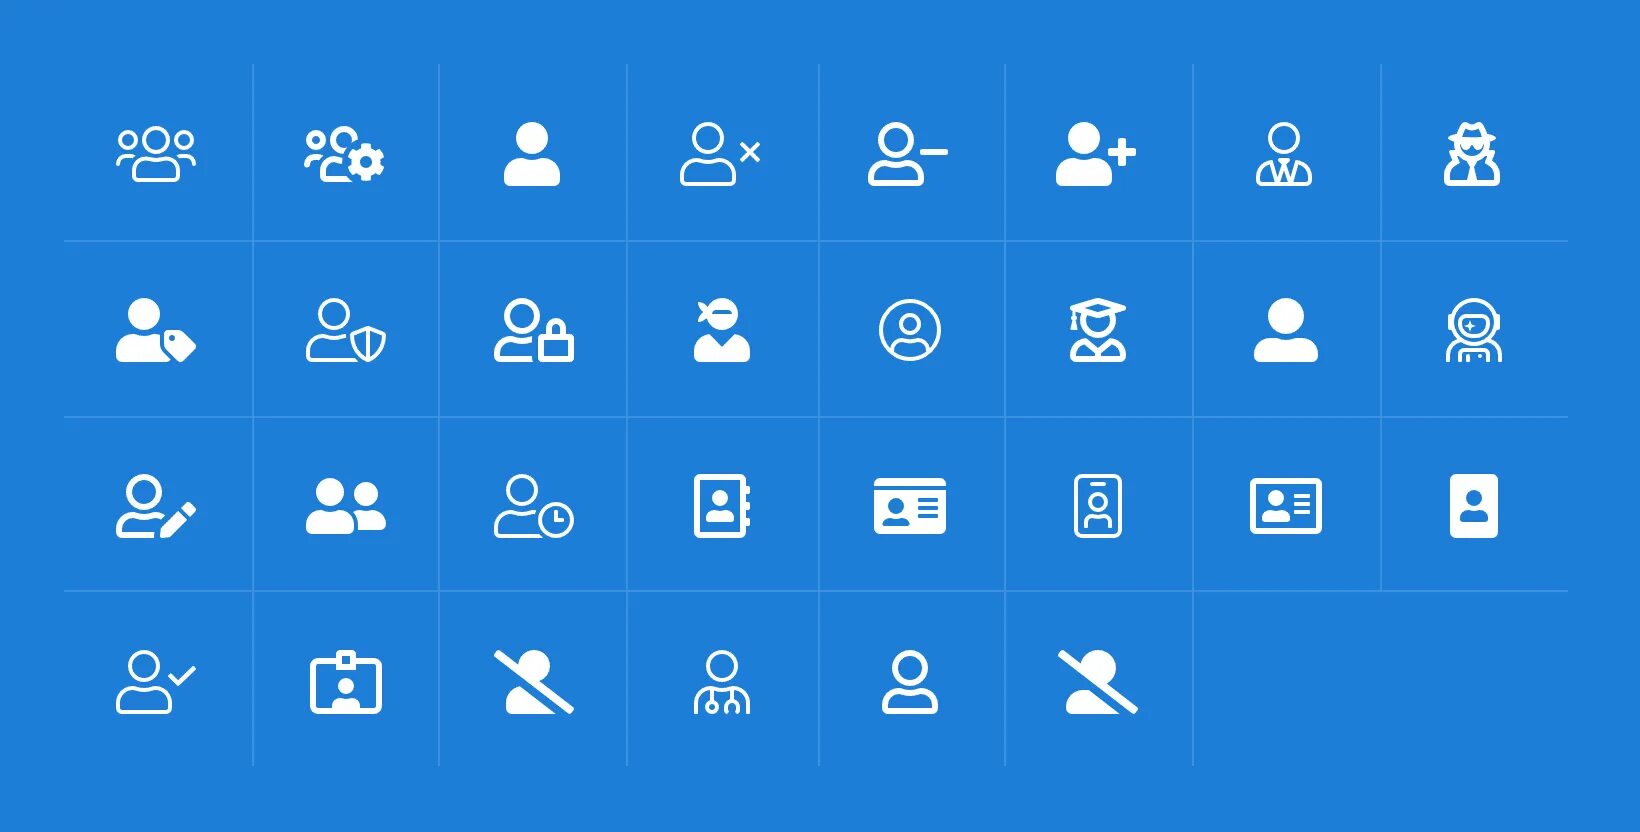 Icons cdn. Font Awesome. Шрифт font Awesome. Font Awesome logo. Awesome icons.